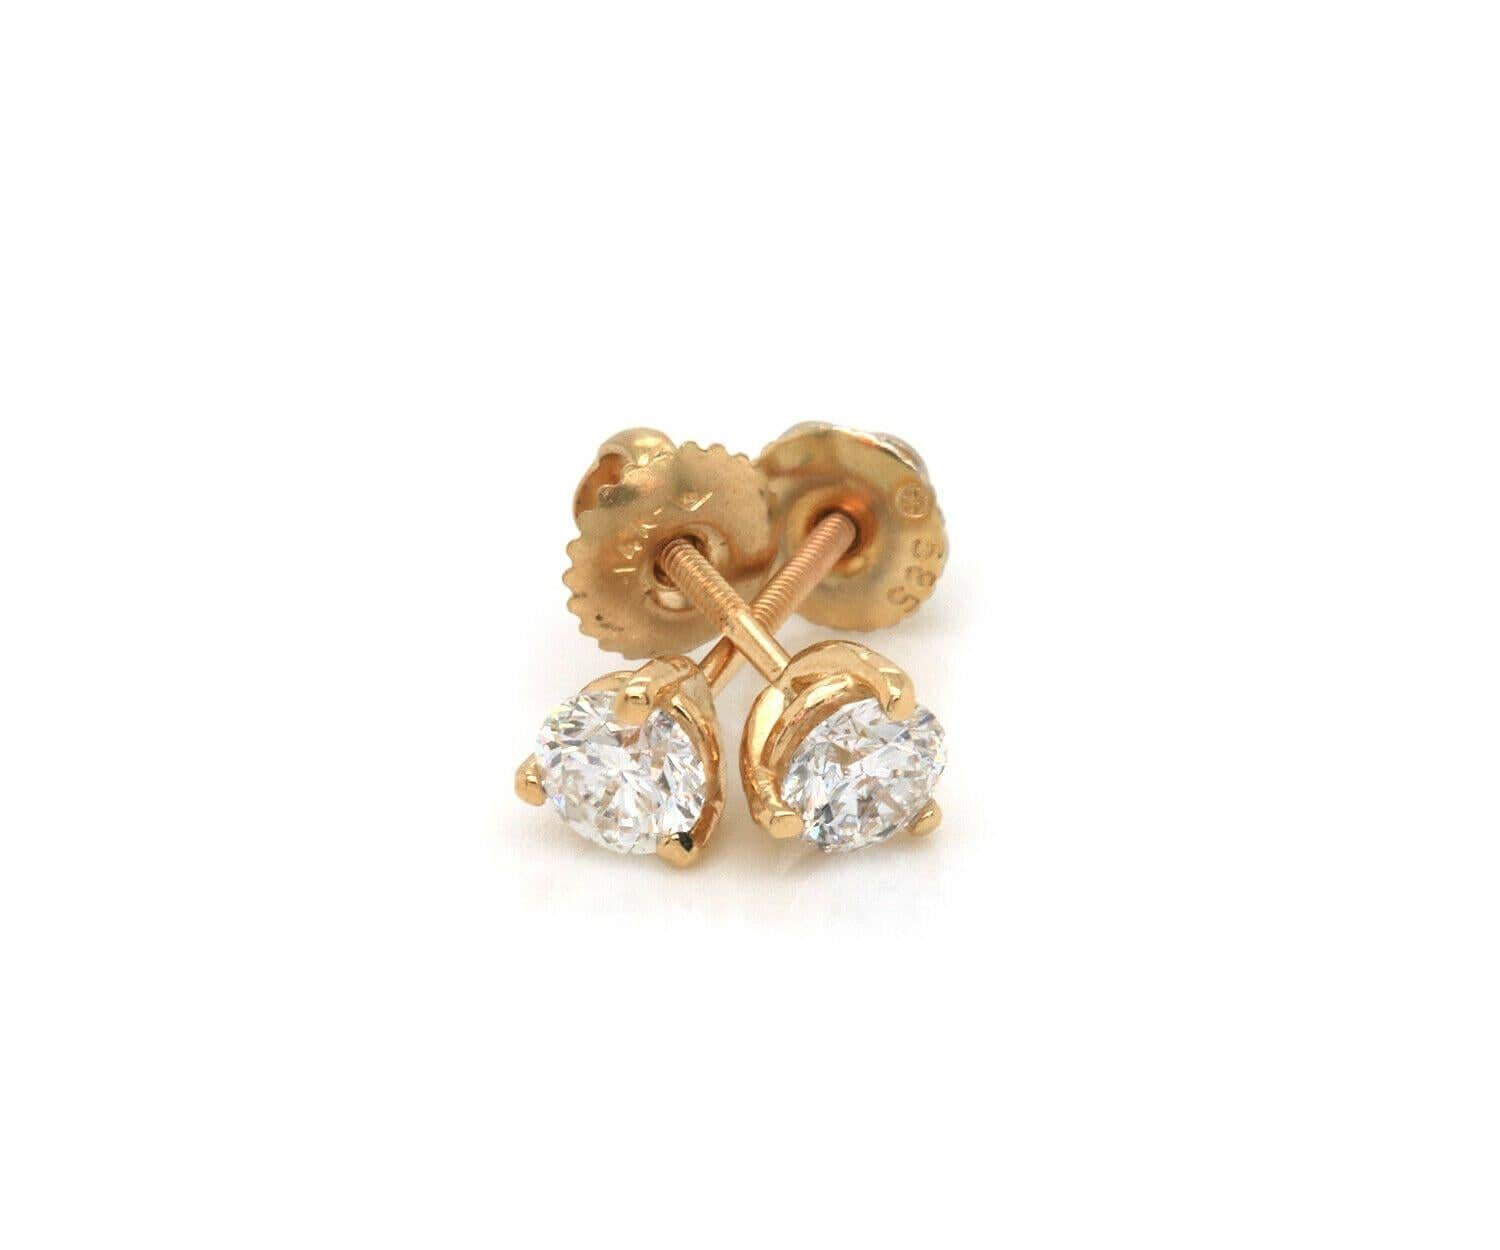 0.64ctw Diamond Solitaire Stud Earrings in 14K

Diamond Solitaire Stud Earrings
14K Yellow Gold
Diamonds Carat Weight: Approx. 0.64ctw
Weight: Approx. 1.13 Grams
Stamped: 585

Condition:
Offered for your consideration is a pair of previously owned